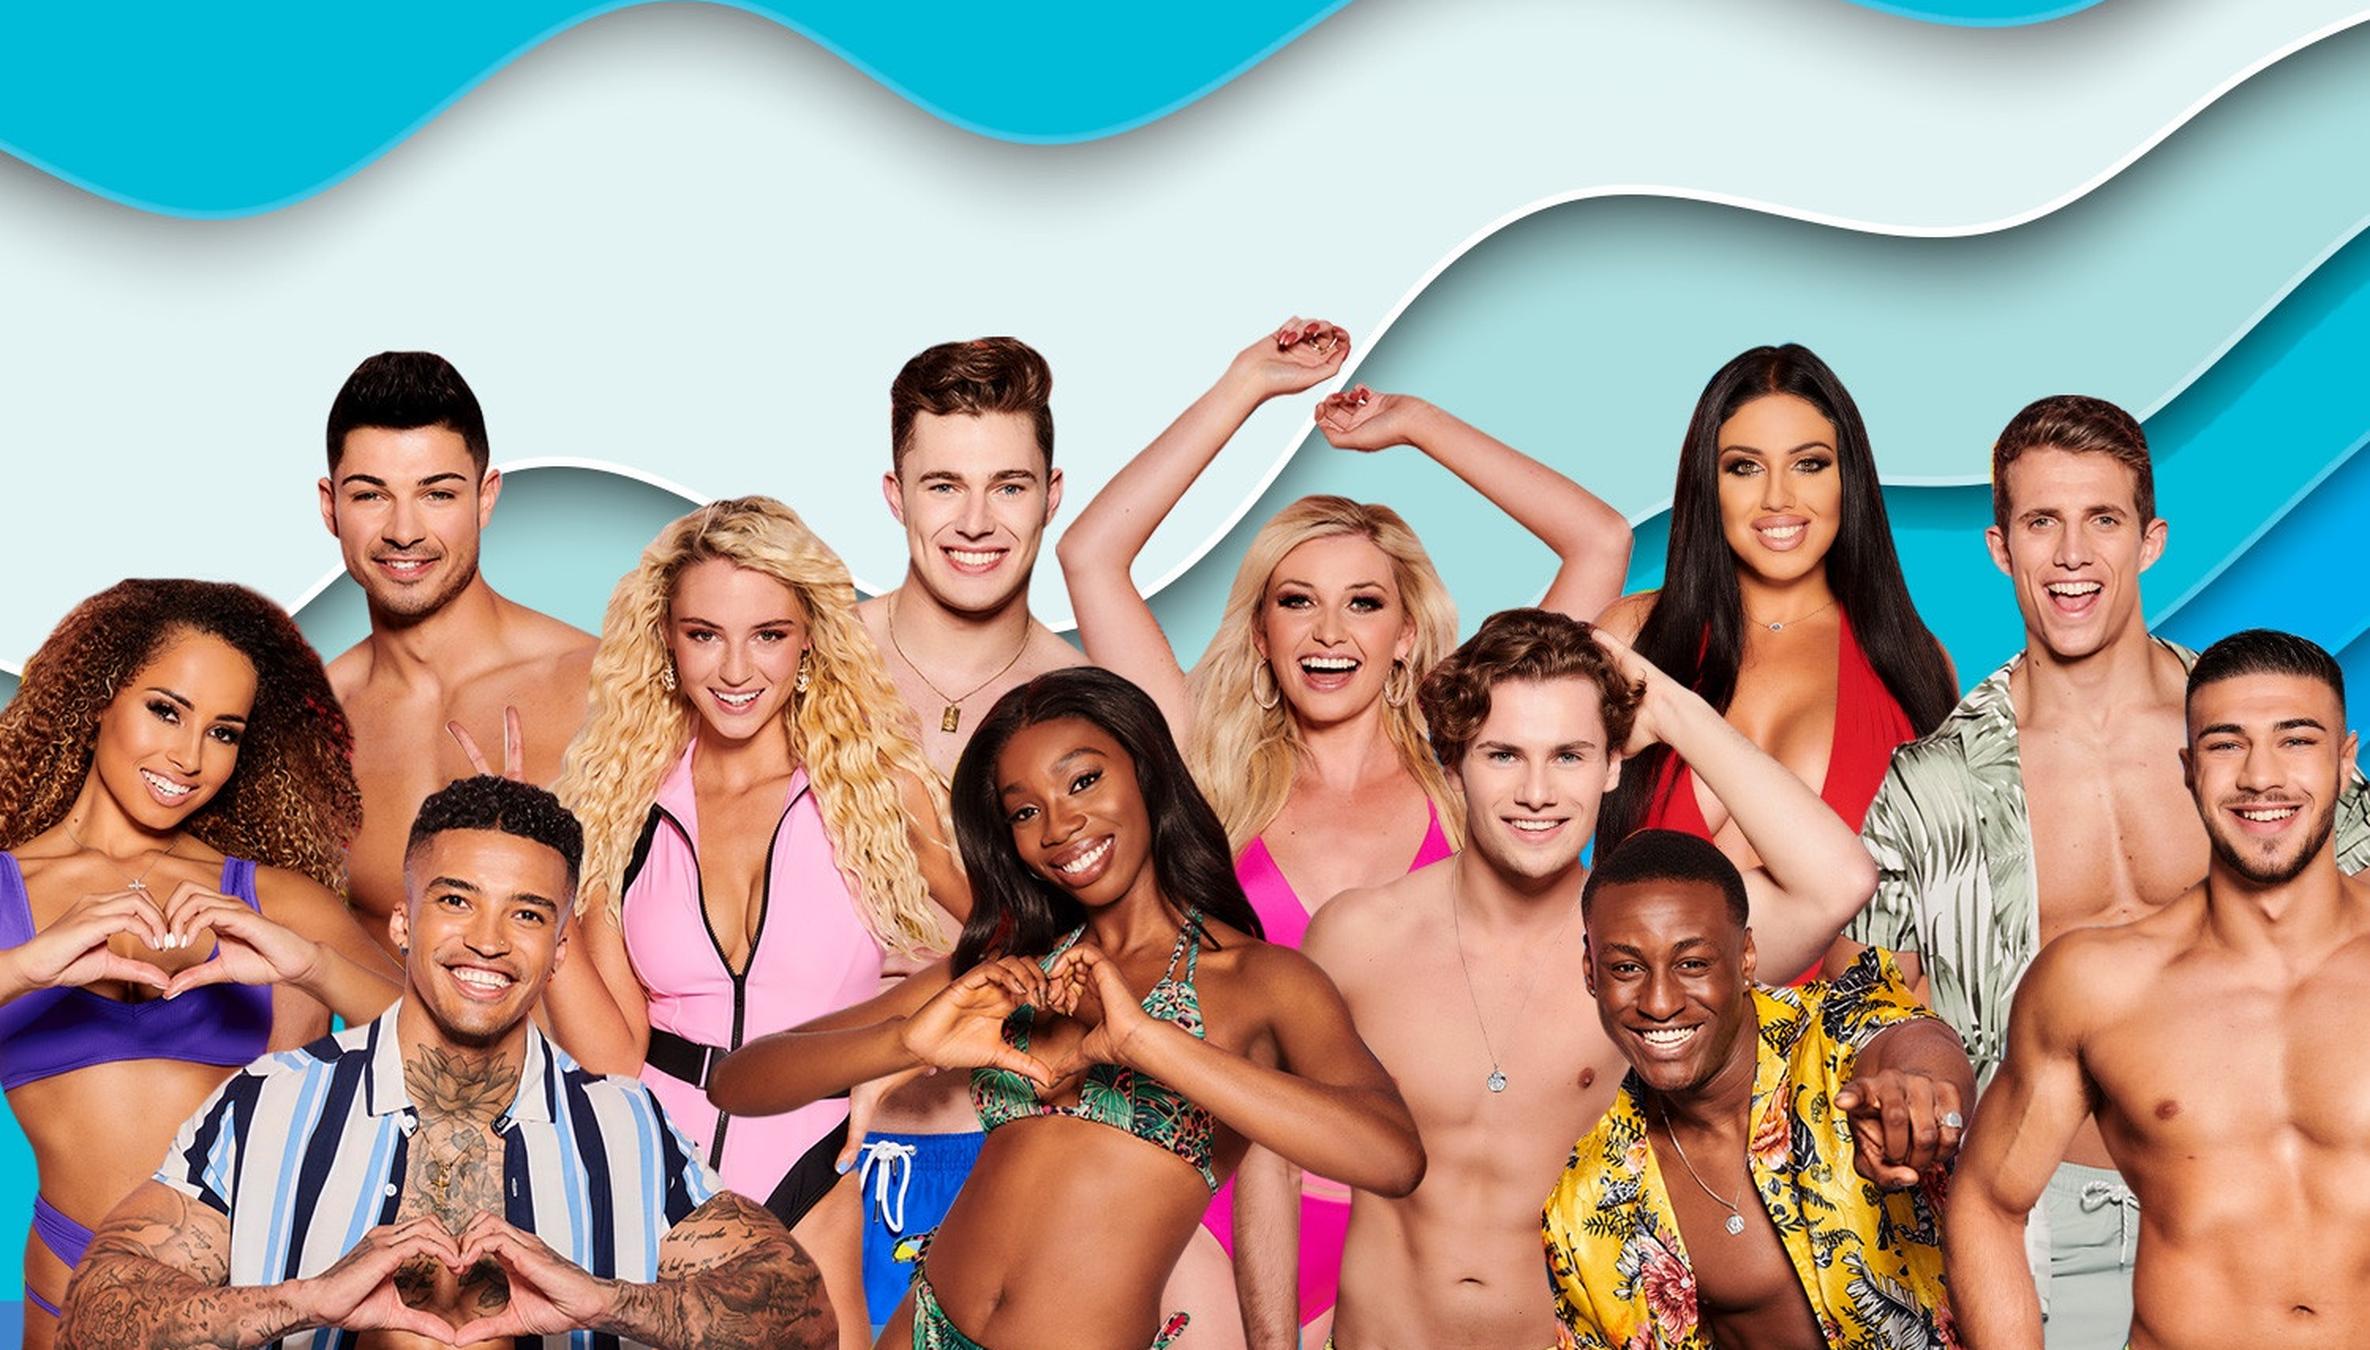 Miss ‘Love Island’? These 3 Reality Shows Are Casting Right Now in the UK